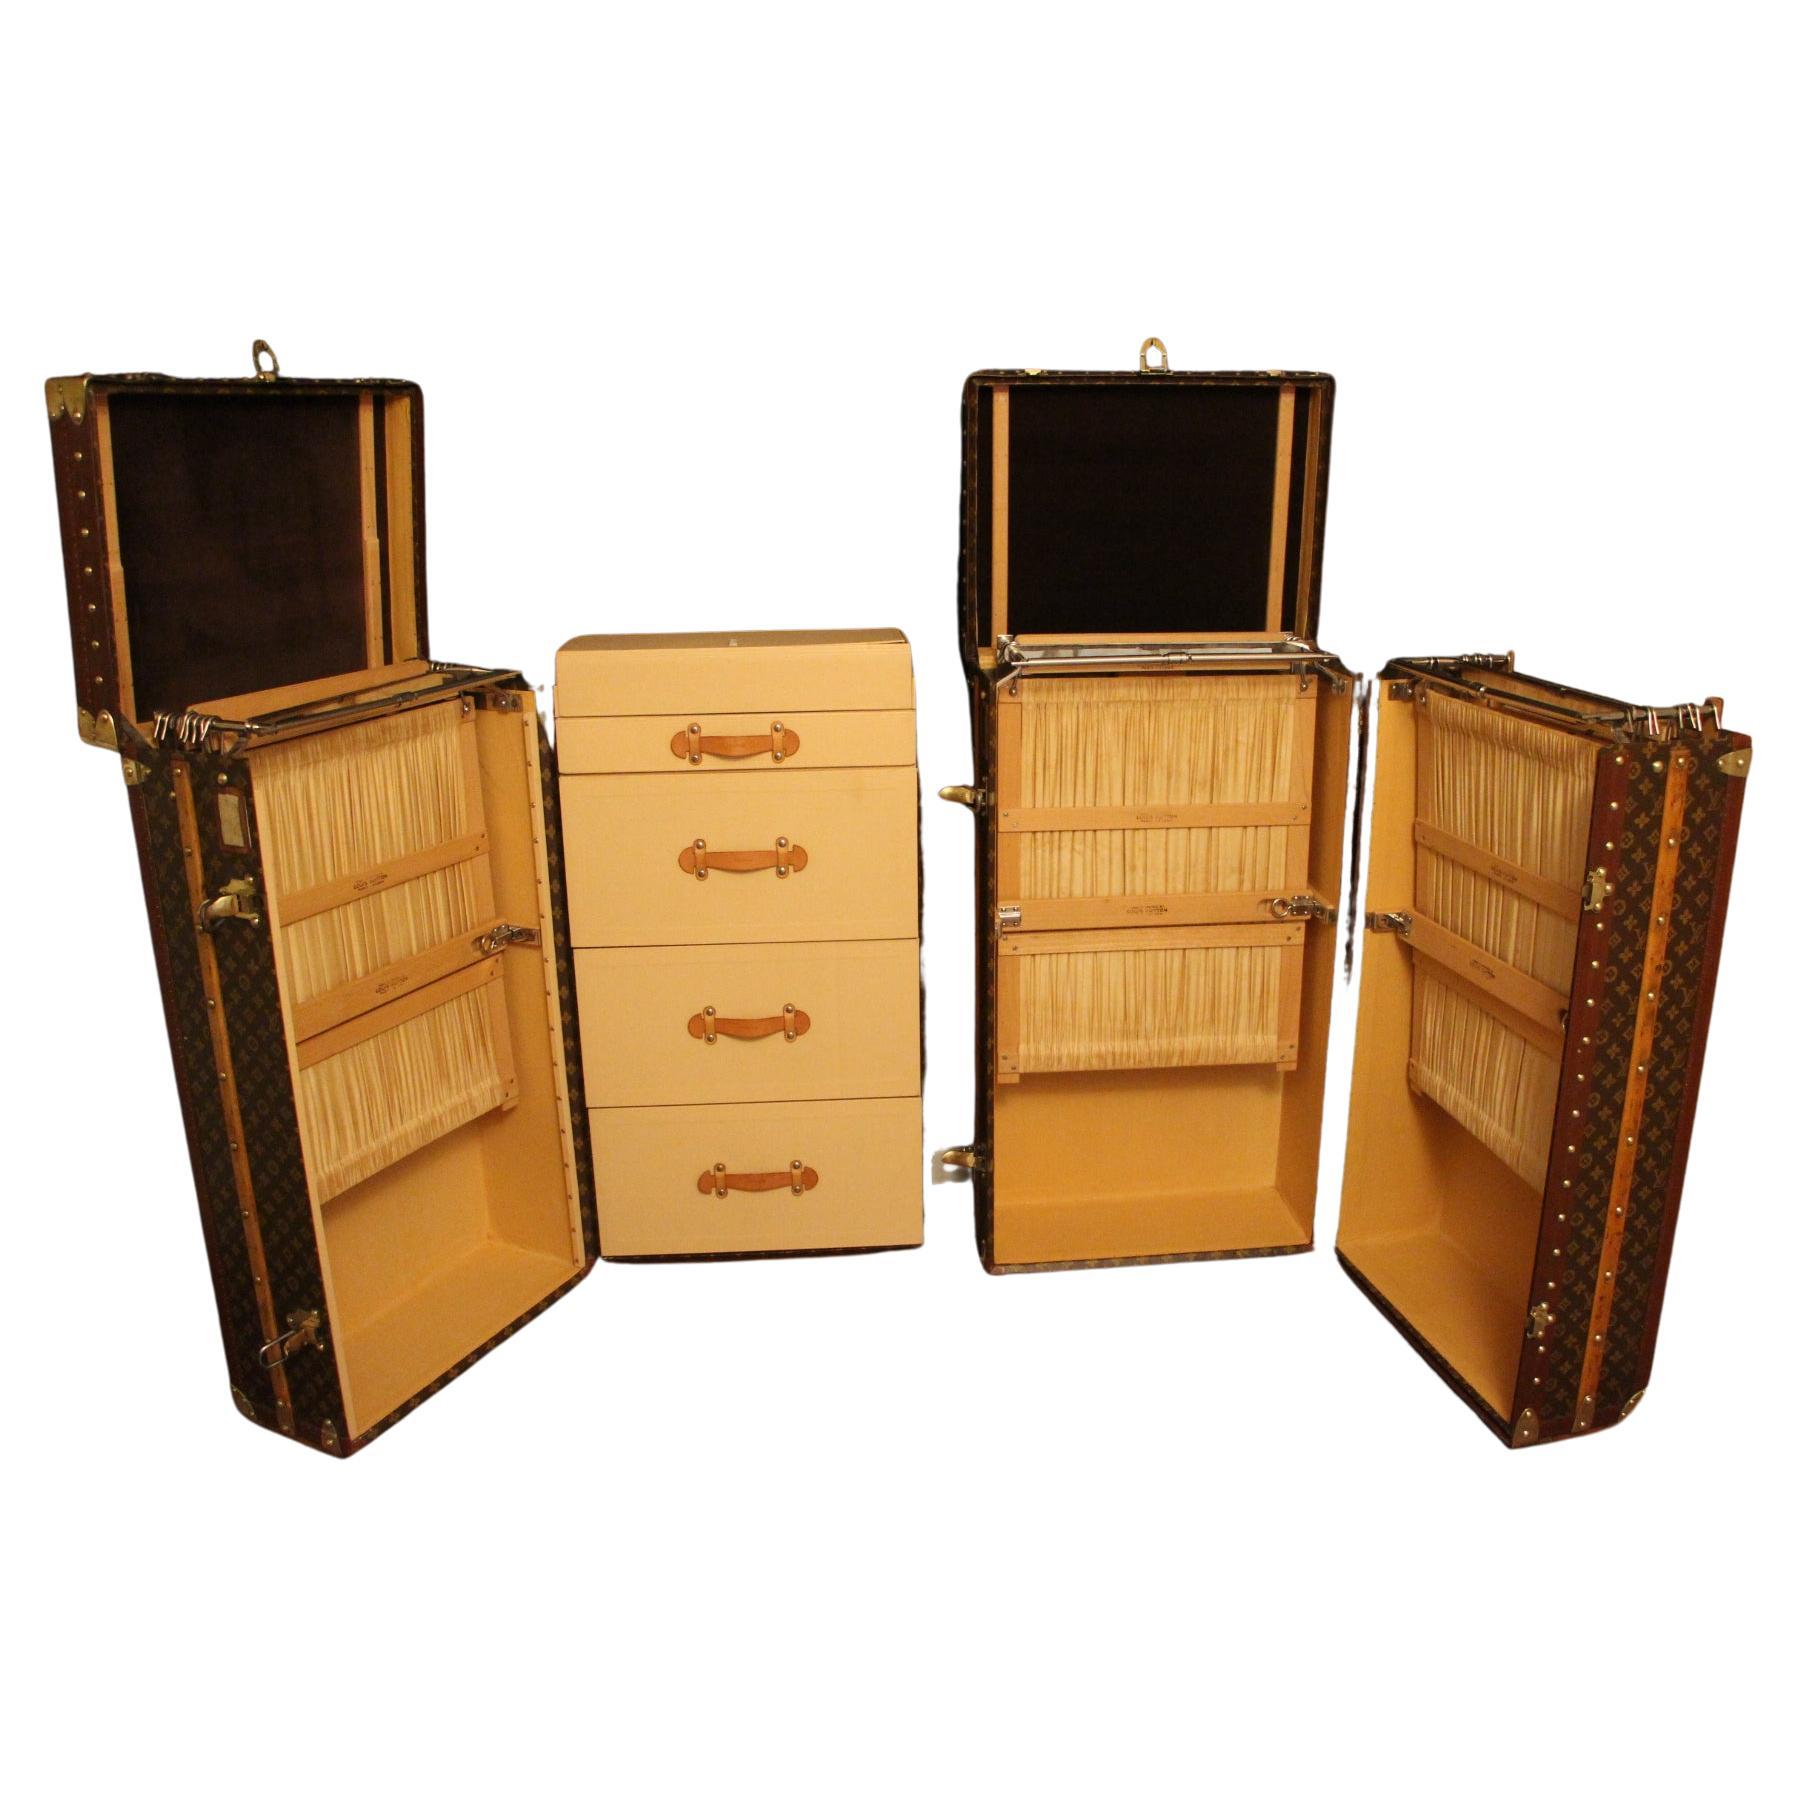 LOUIS VUITTON Vintage Wardrobe 85 Casier Trunk Available For